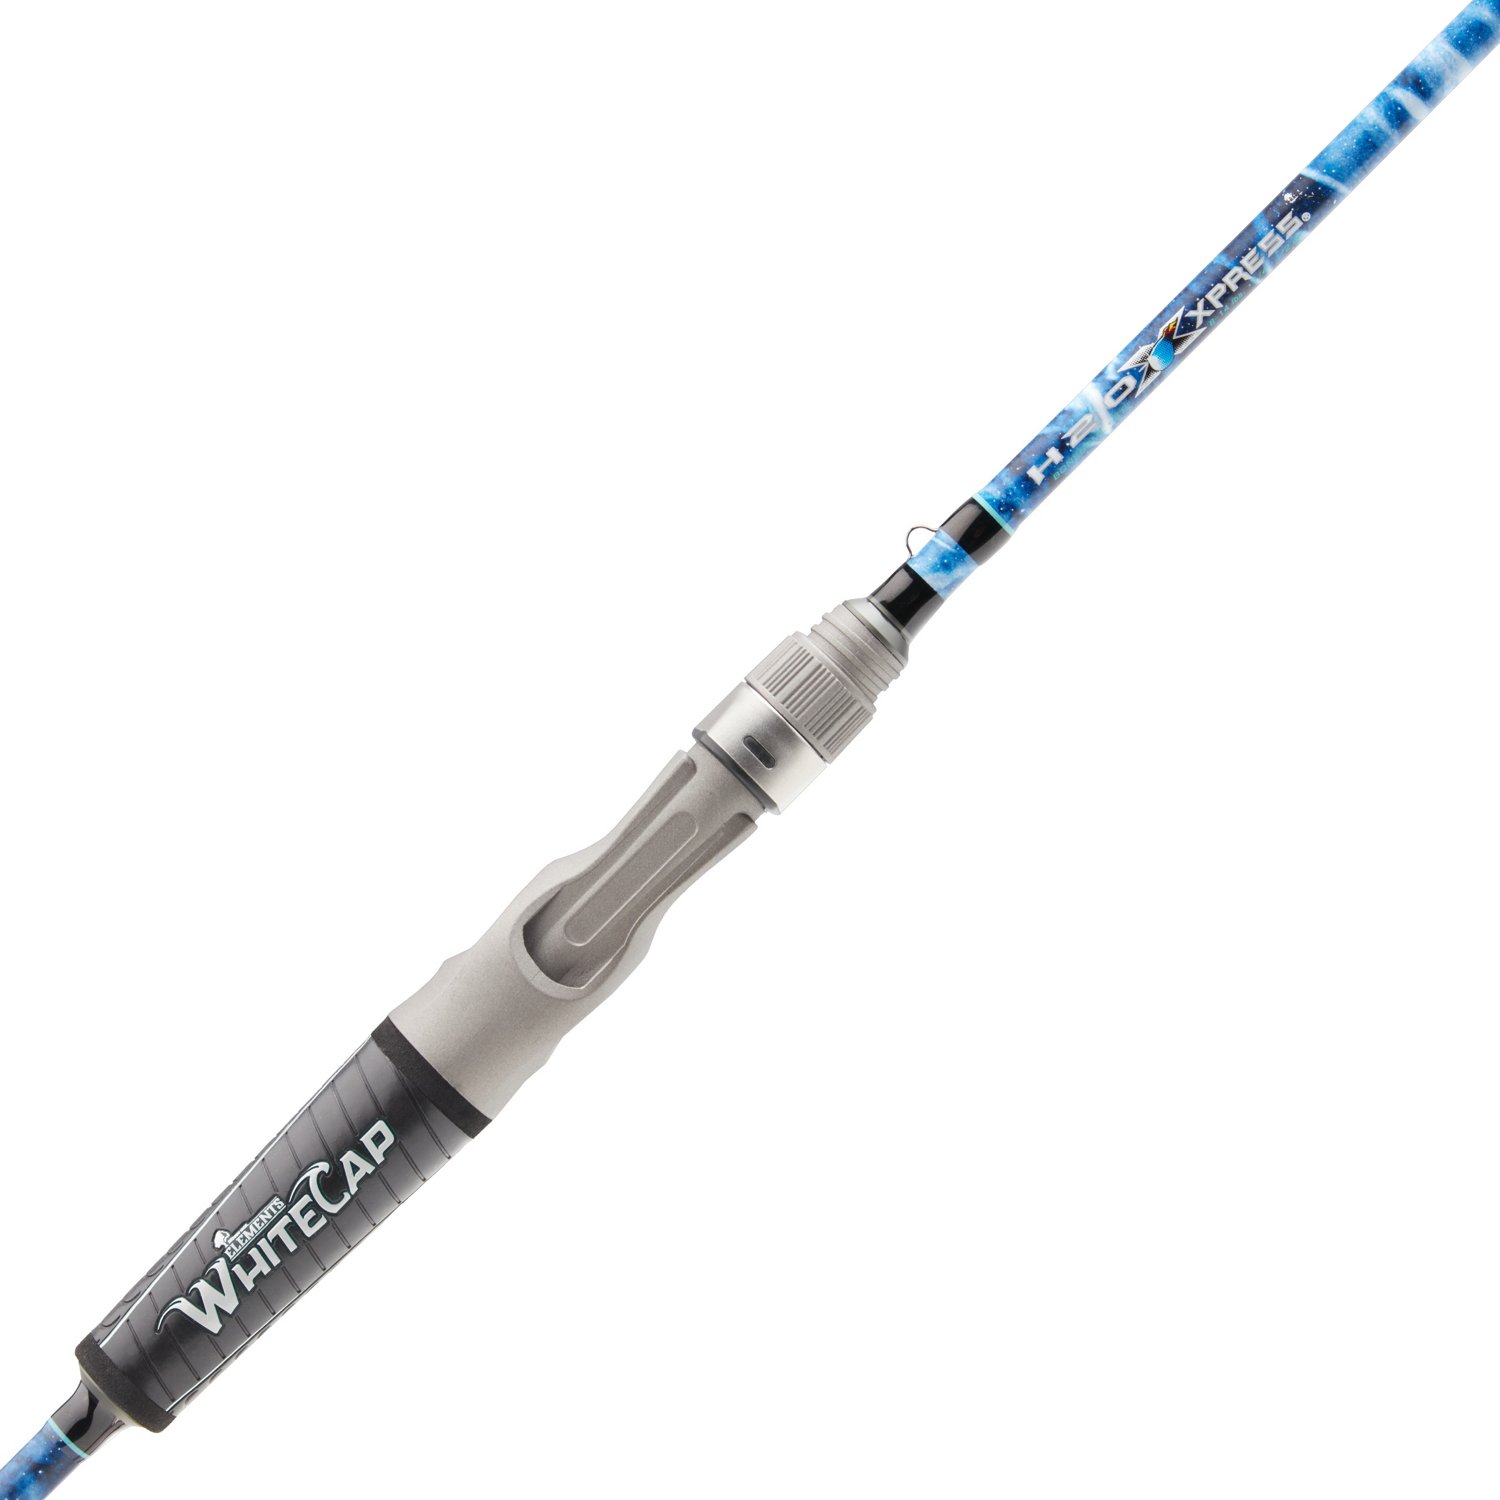 Academy Sports H20 Express Rod Review. (Casting & Spinning) 